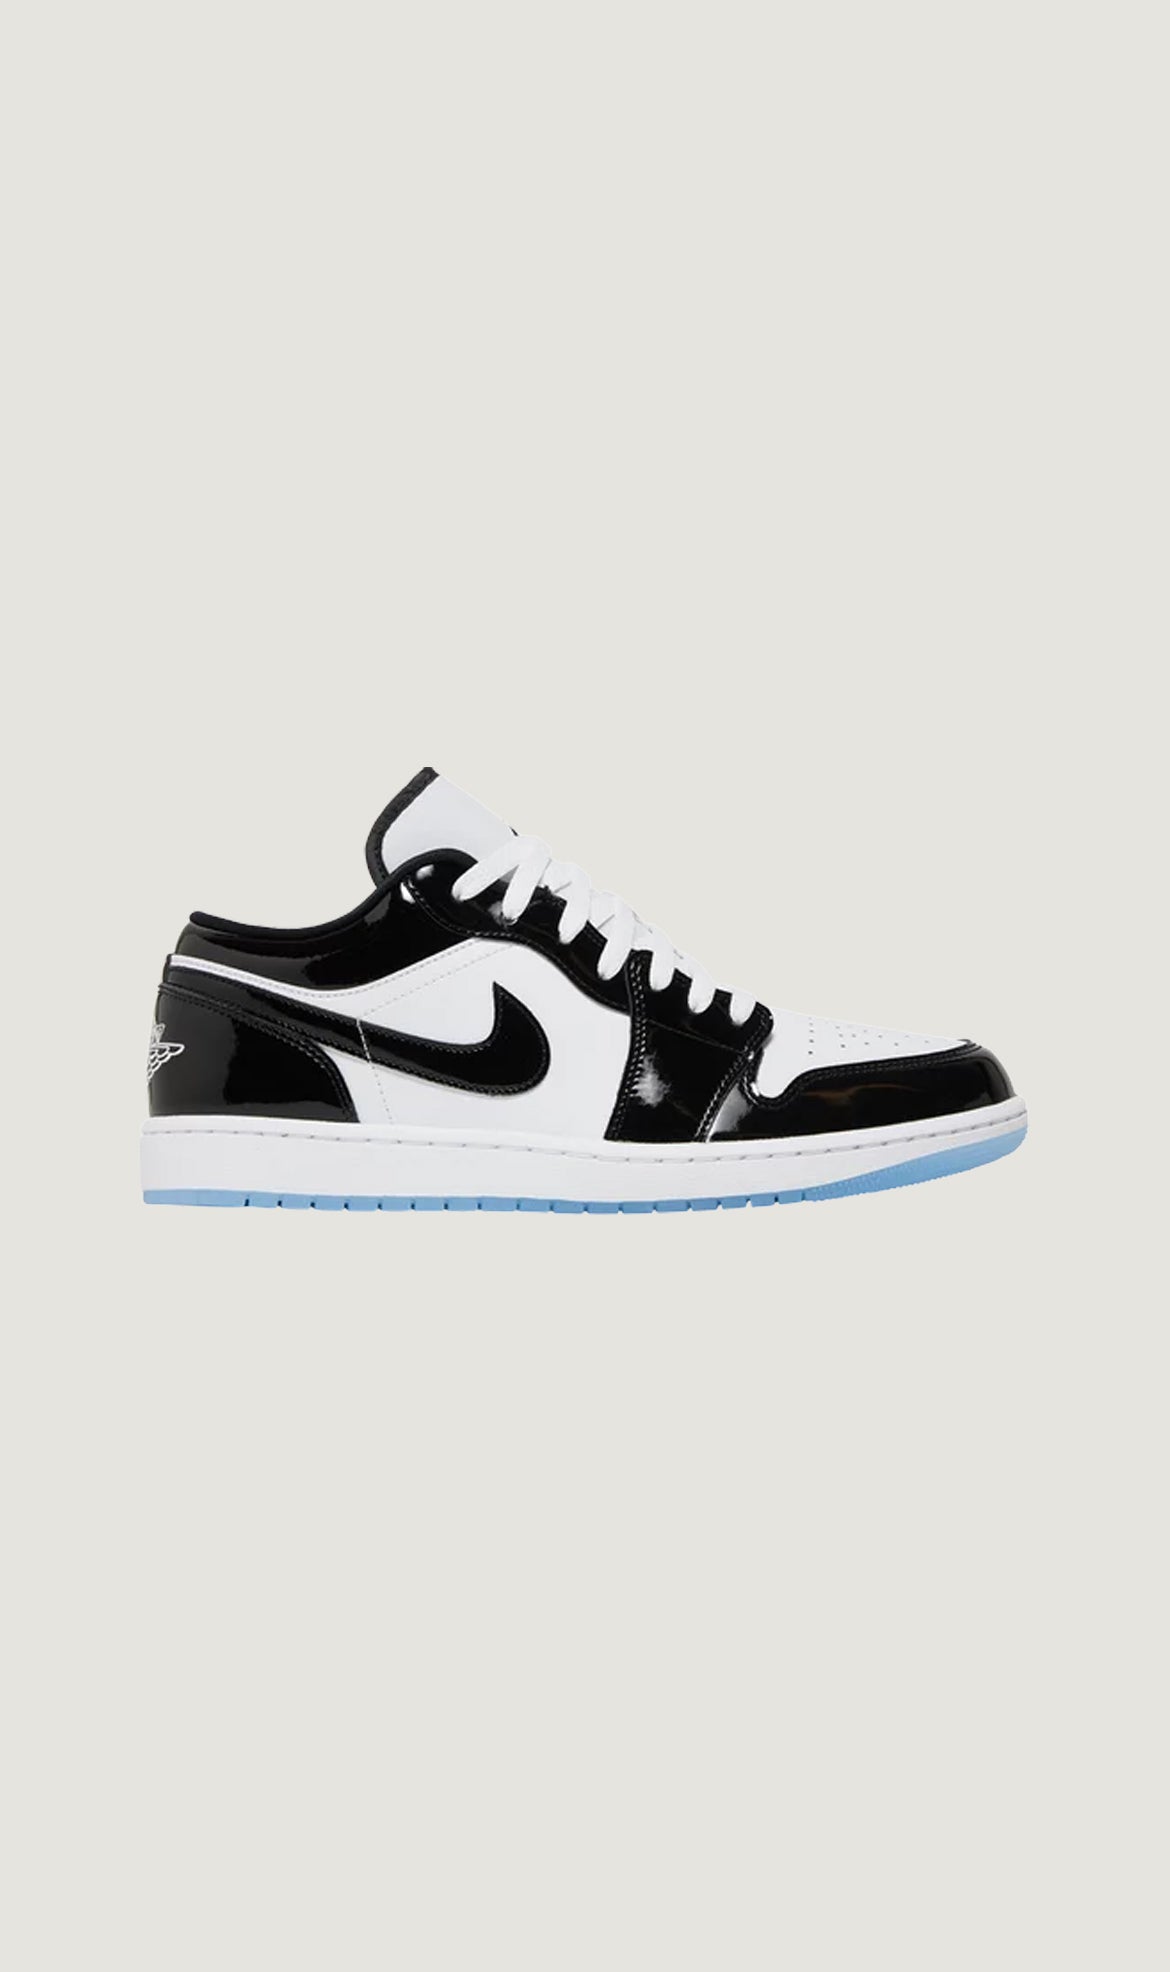 Load image into Gallery viewer, AIR JORDAN 1 LOW SE - CONCORD
